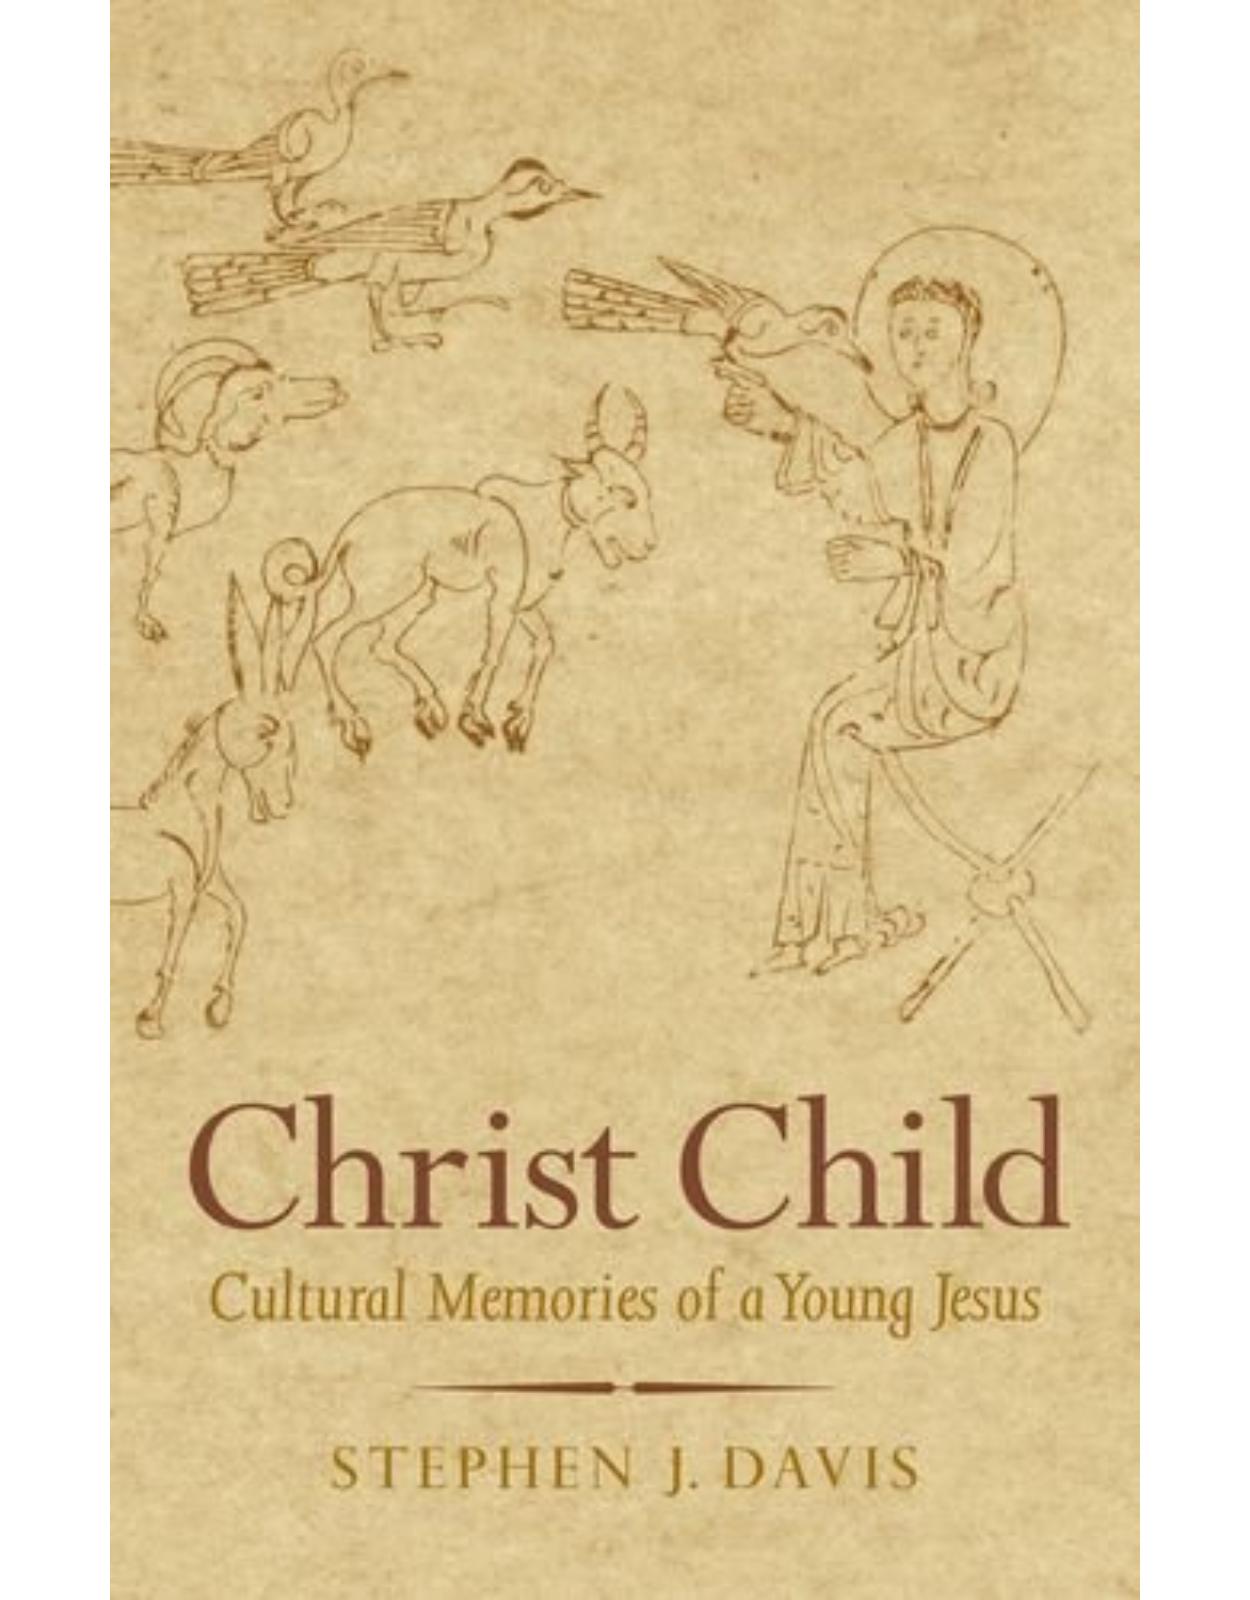 Christ Child. Cultural Memories of a Young Jesus